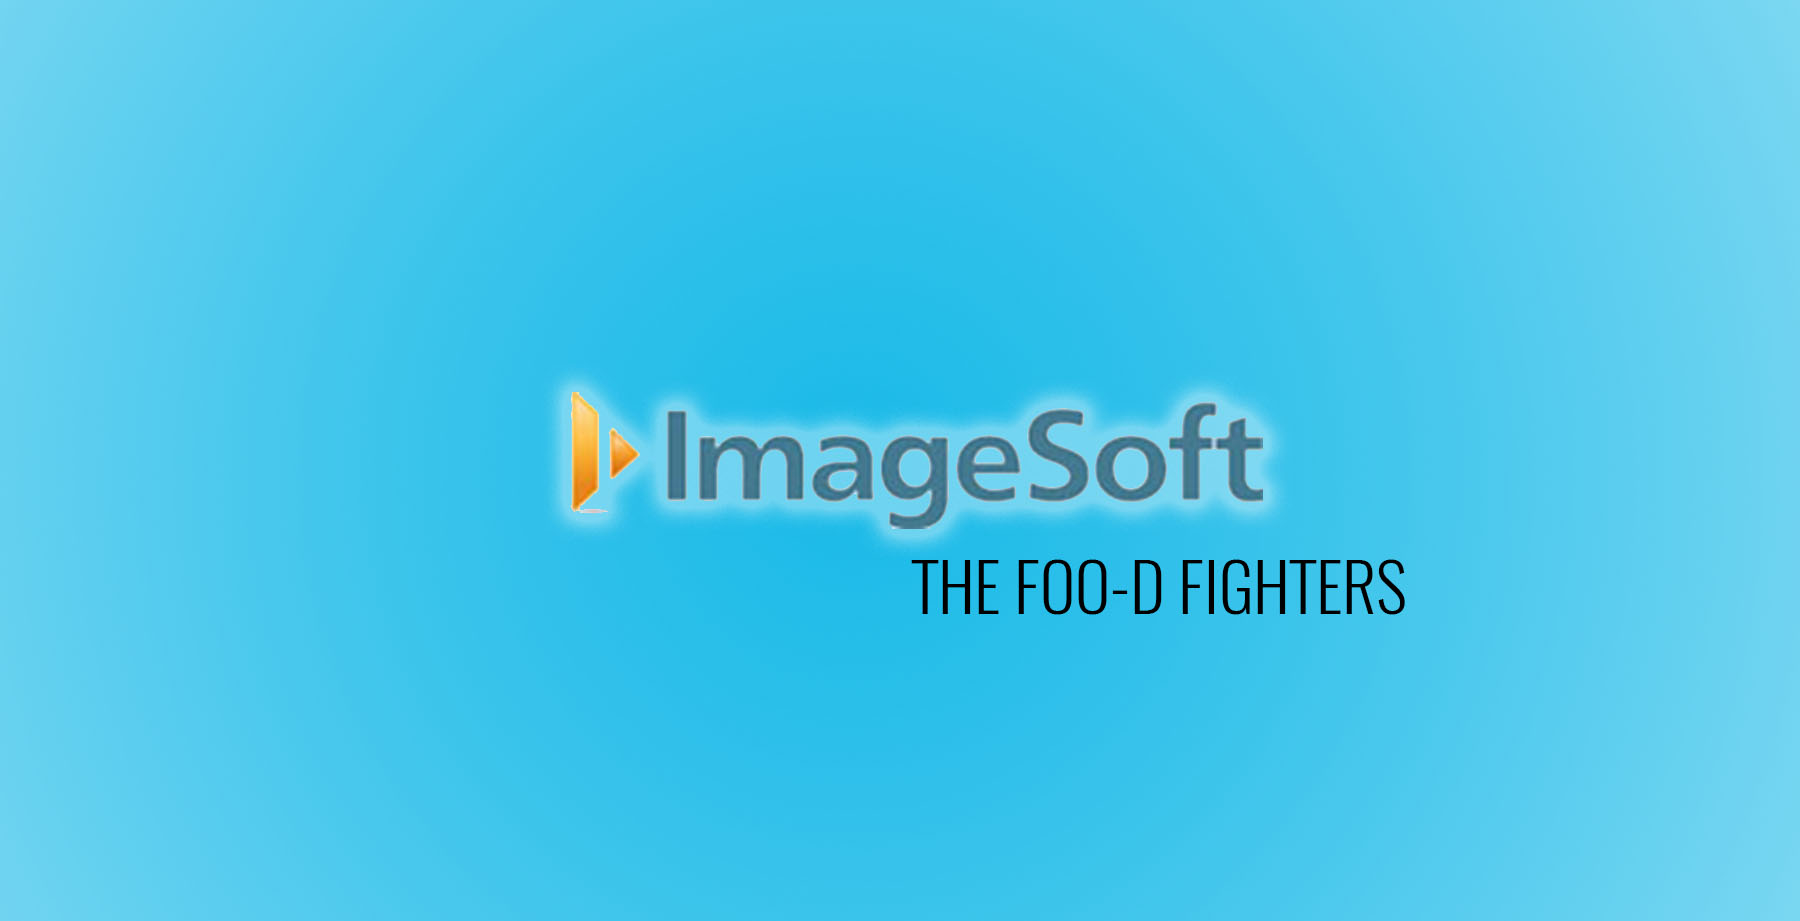 ImageSoft – The Foo-d Fighters